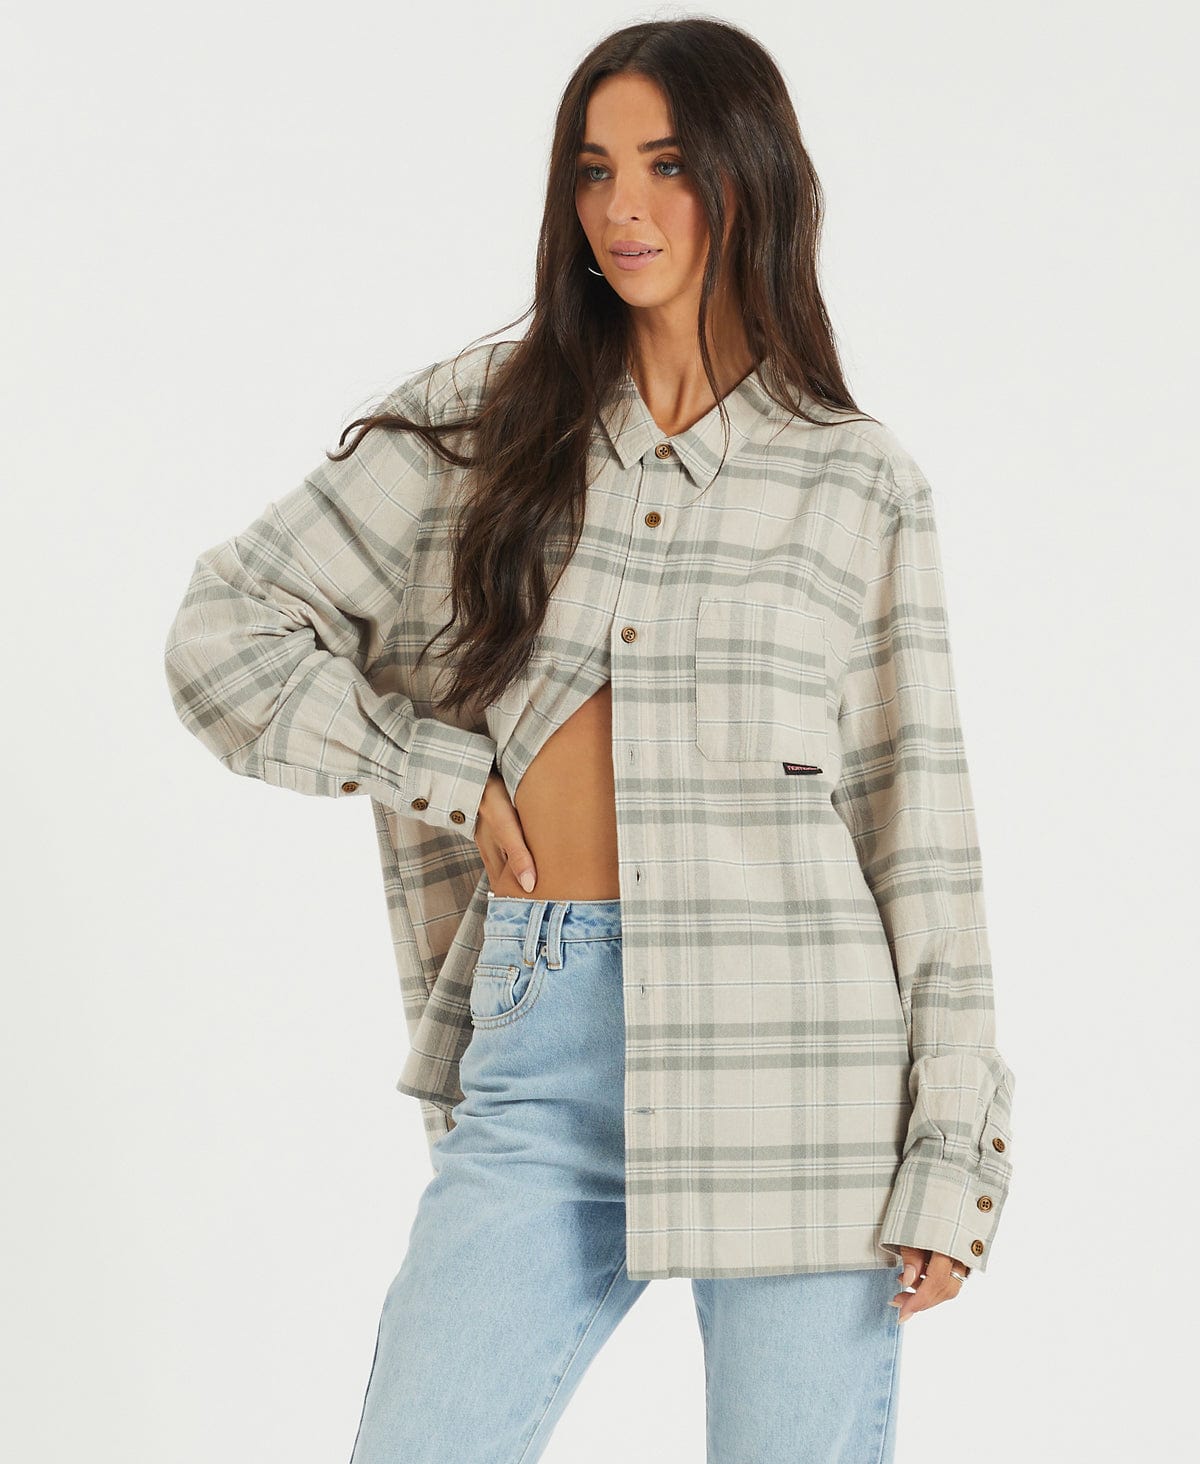 Replay Casual Long Sleeve Shirt Silver Check – Neverland Store